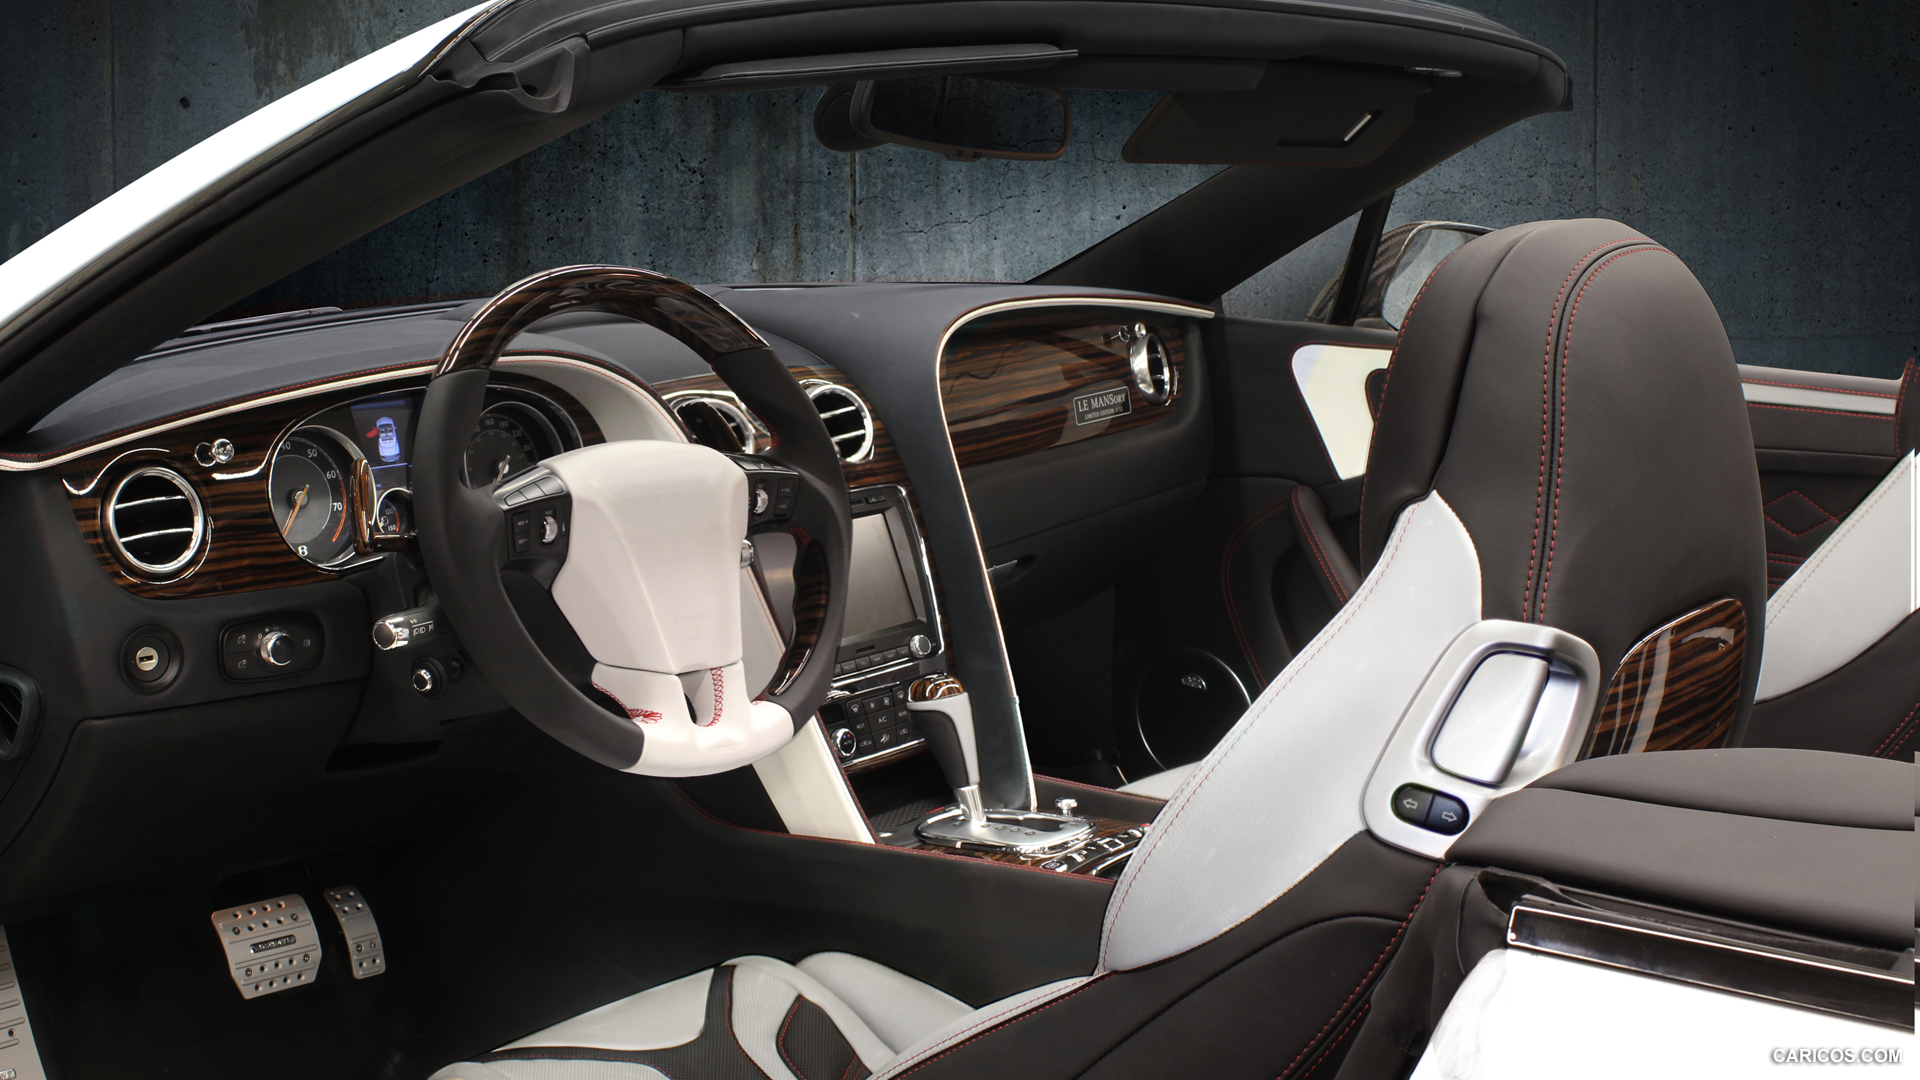 2012 Mansory Bentley Continental GTC LE MANSORY II Two-Tone - Interior, #13 of 13